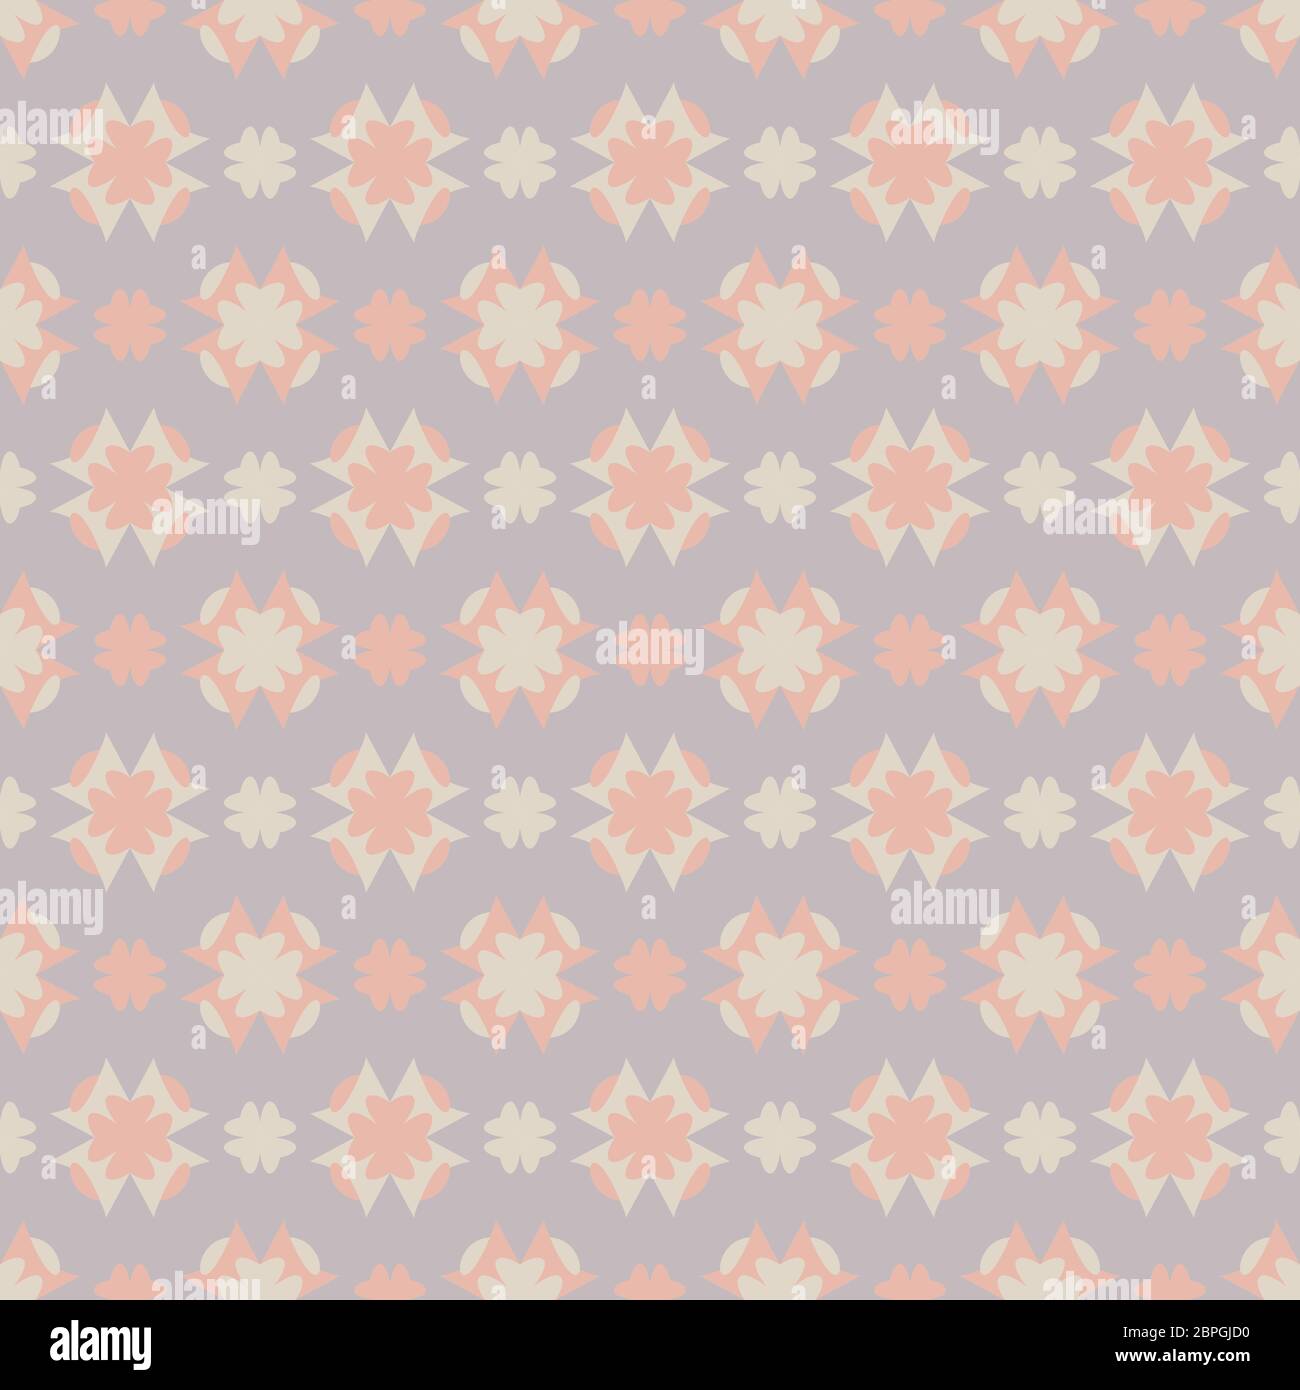 Seamless pattern with hearts. Color grey, orange and cream ivory. Pastel colors. Vector. Stock Vector